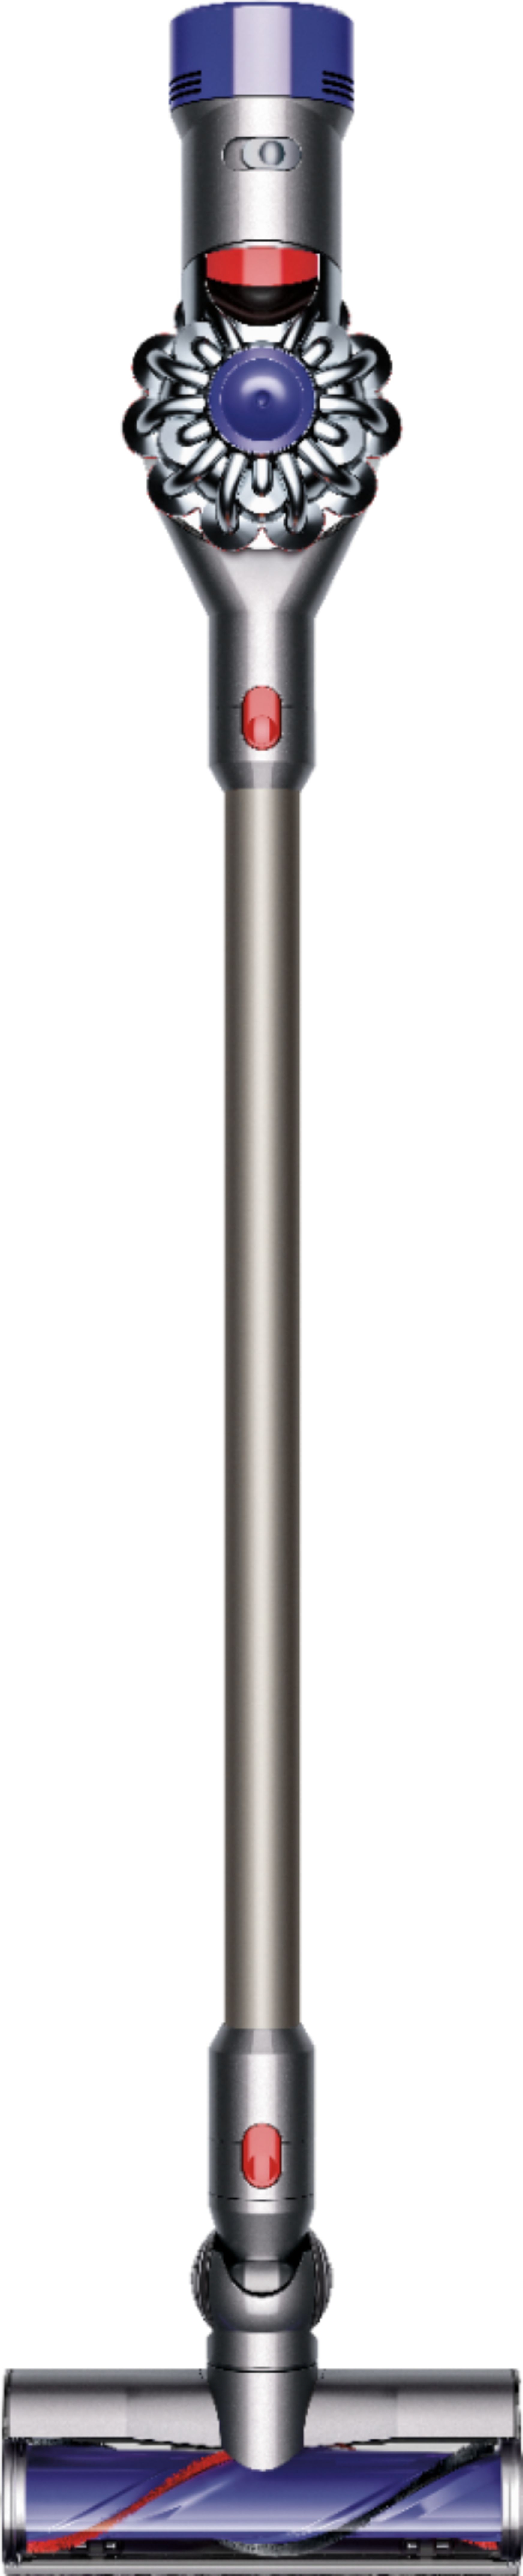 Dyson V8 Animal+ Cordless Stick Vacuum Cleaner: Bagless, HEPA Filter,  Height Adjustment, Telescopic Handle, Rotating Brushes, Battery Operated